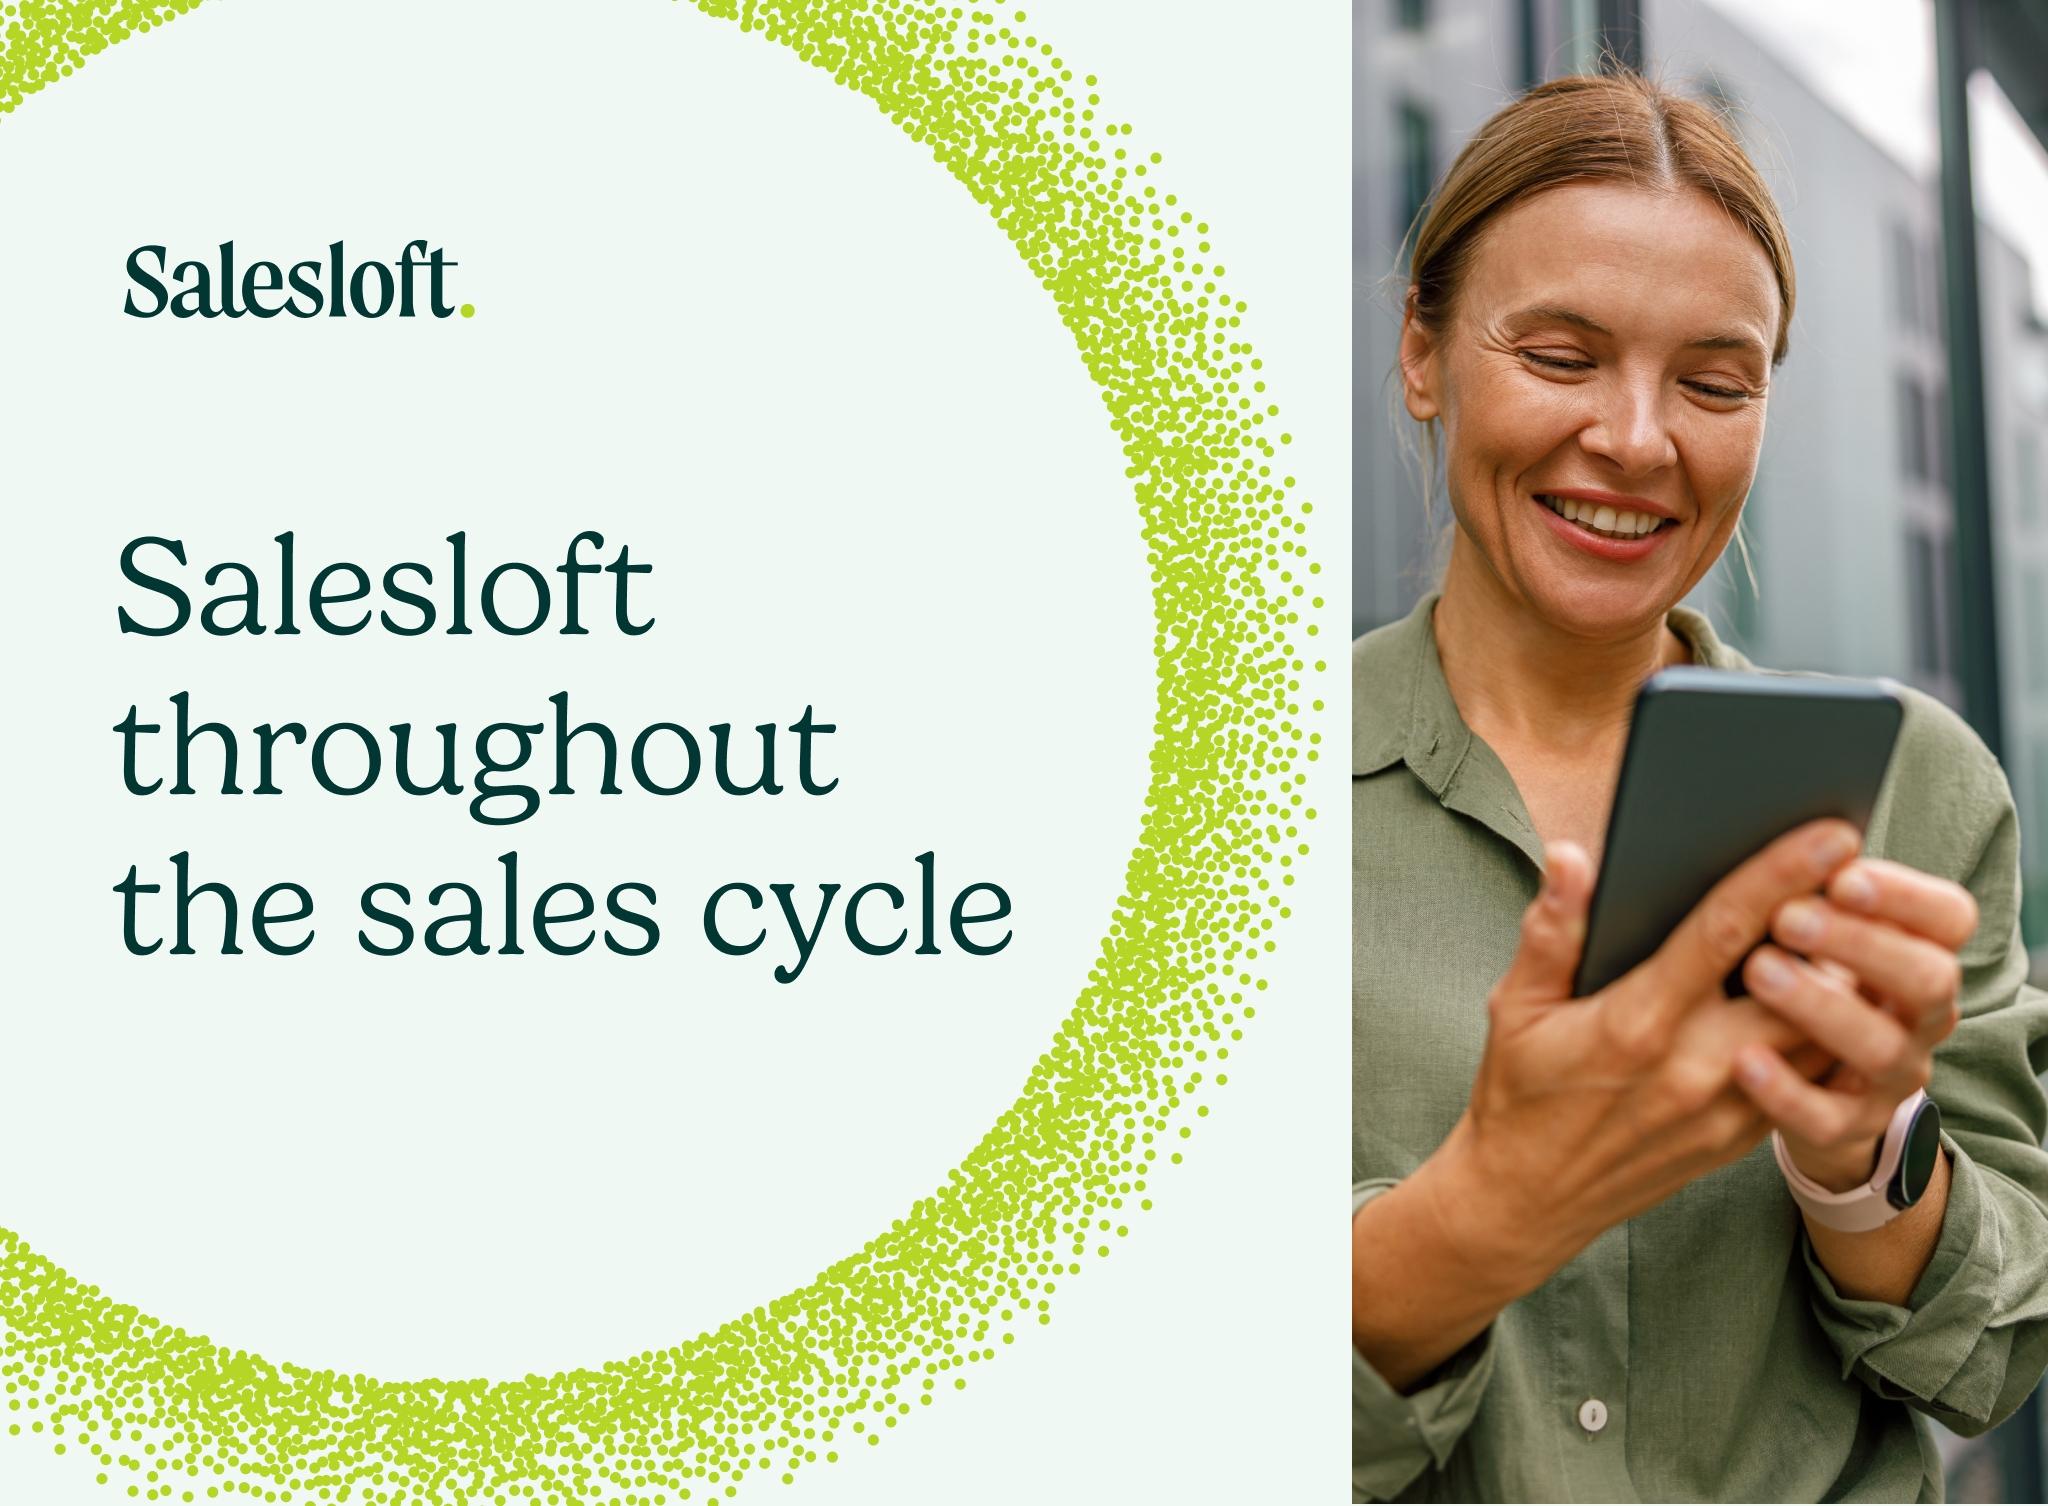 "Salesloft throughout the sales cycle"